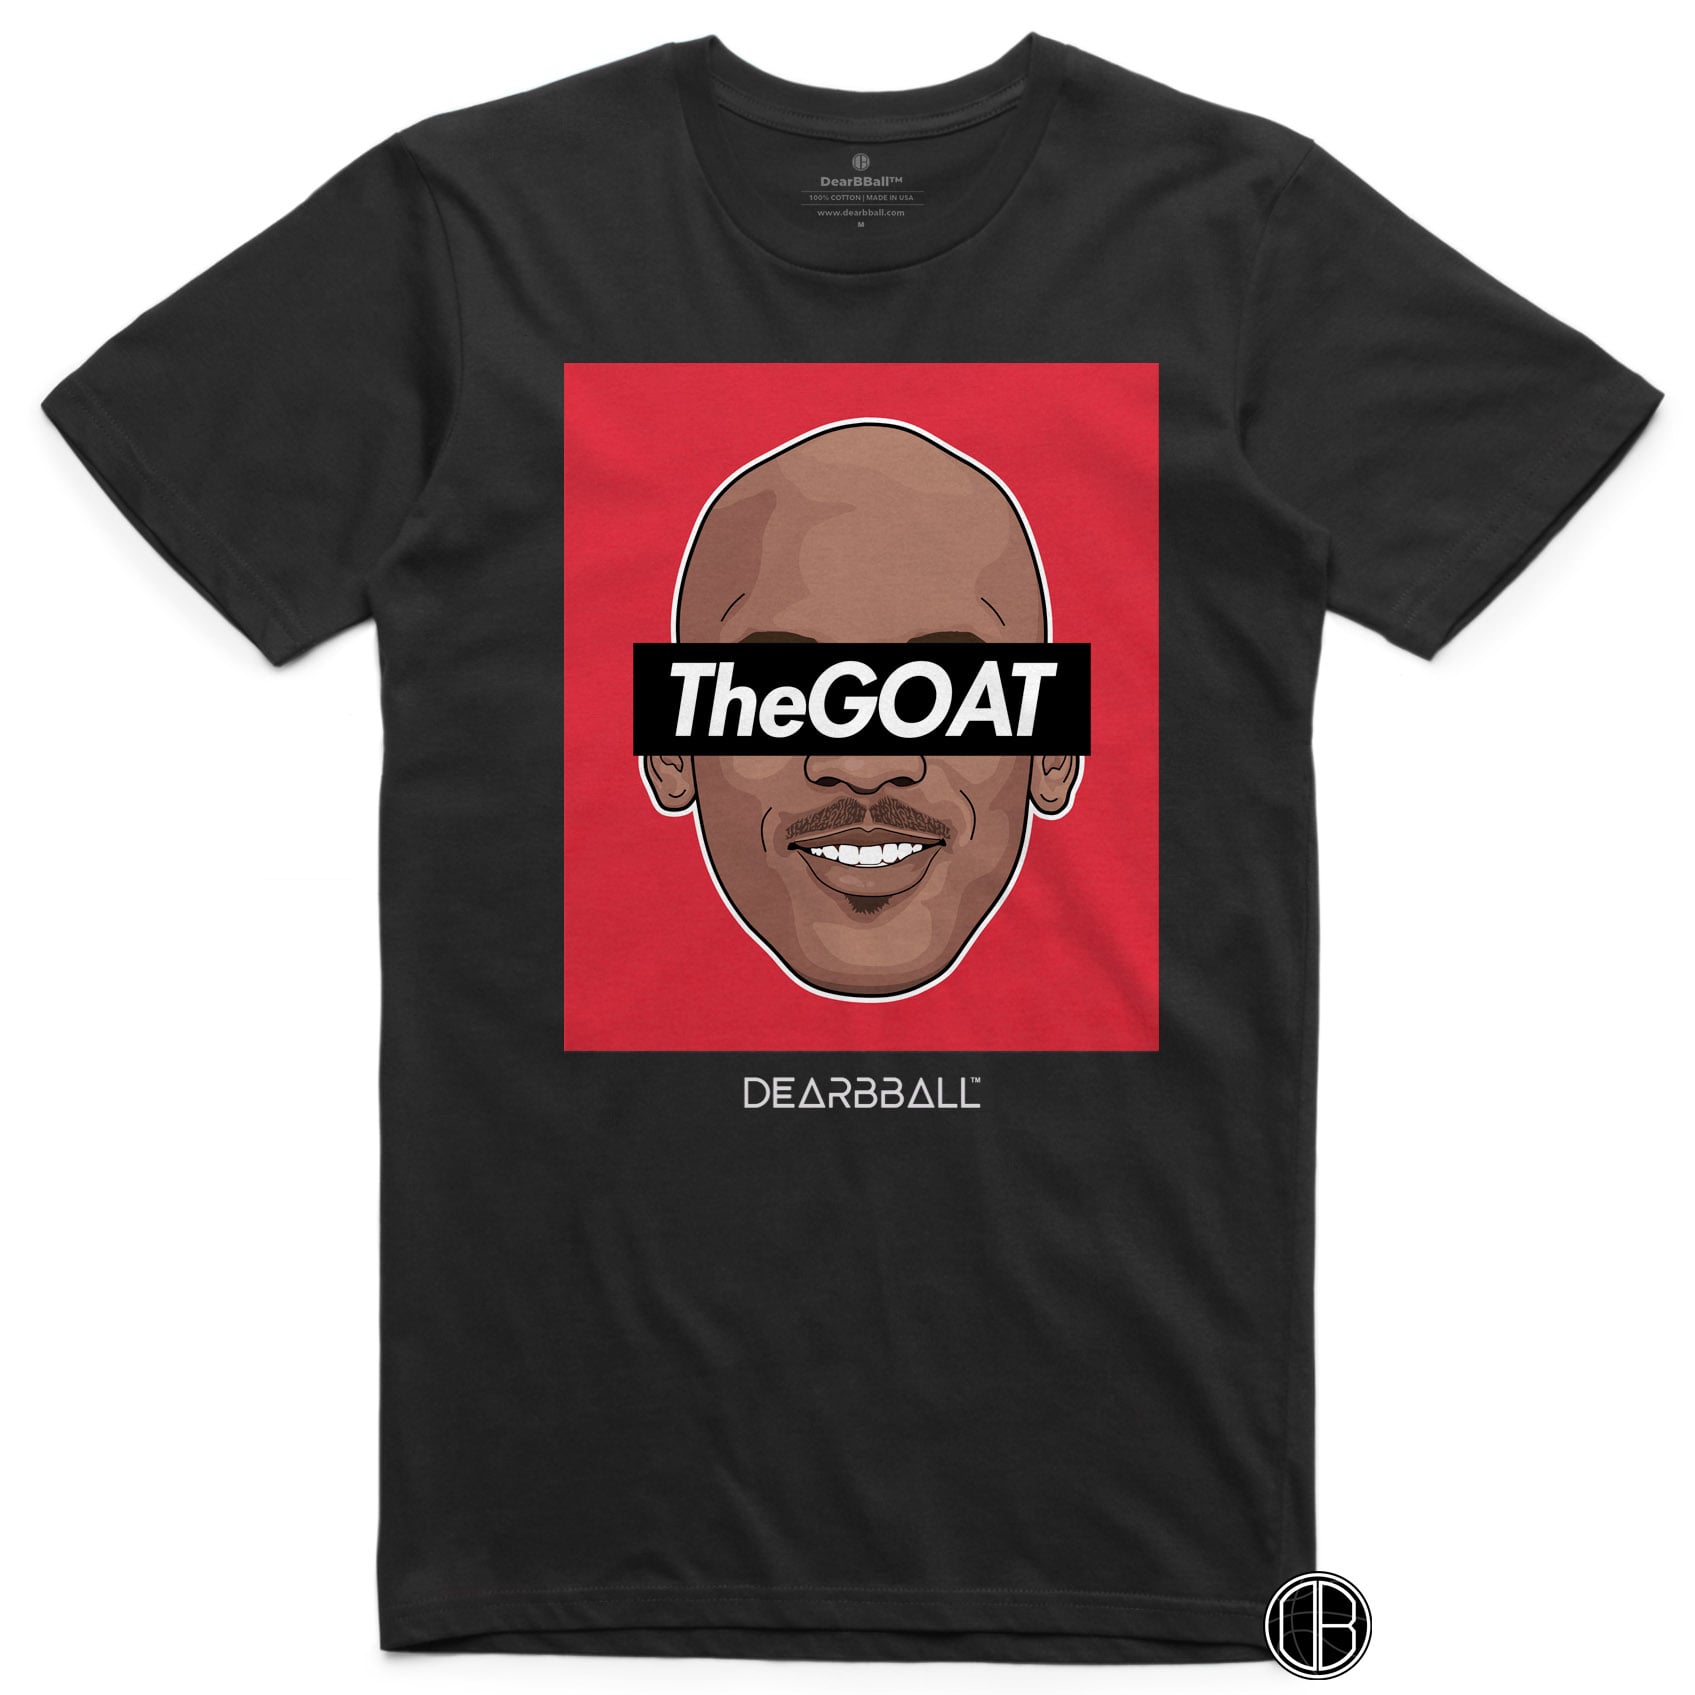 DearBBall T-Shirt - TheGOAT Red Edition